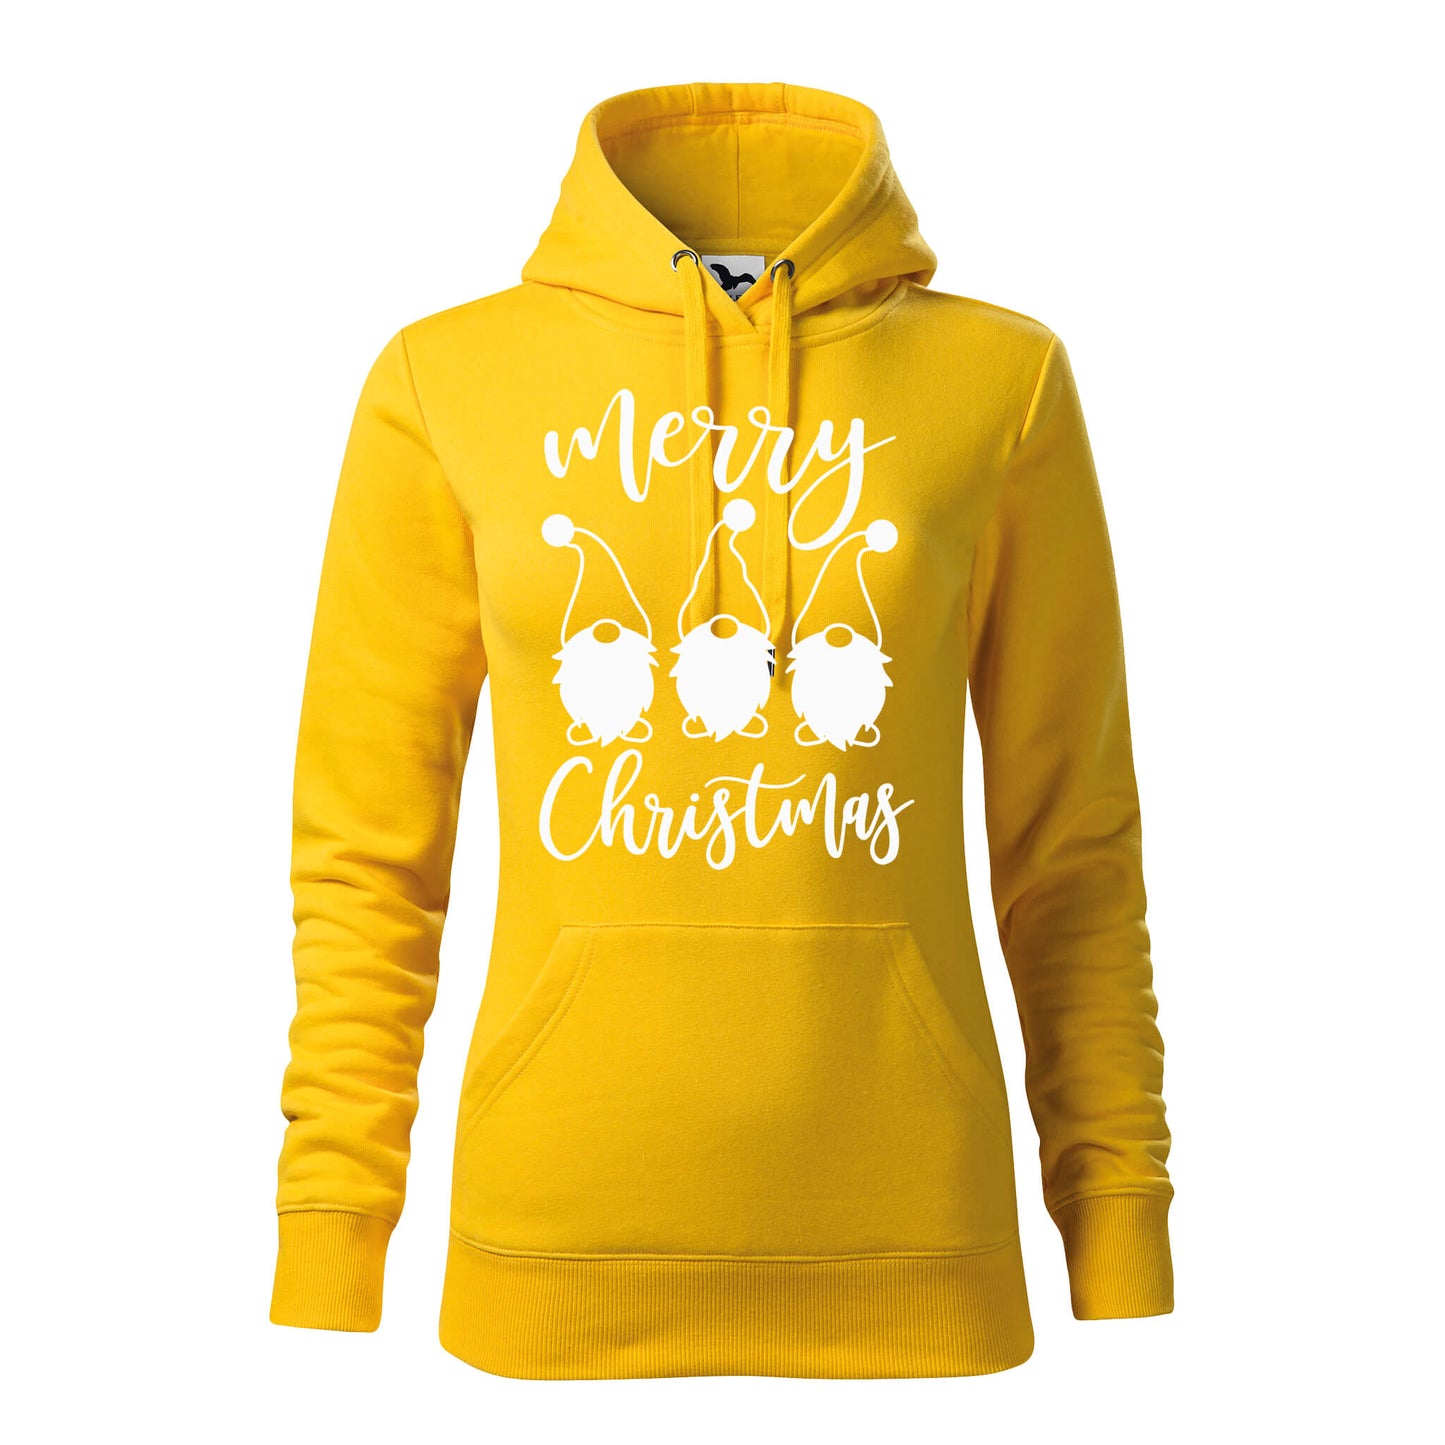 Merry christmas with gnomes rd 2 hoodie - rvdesignprint